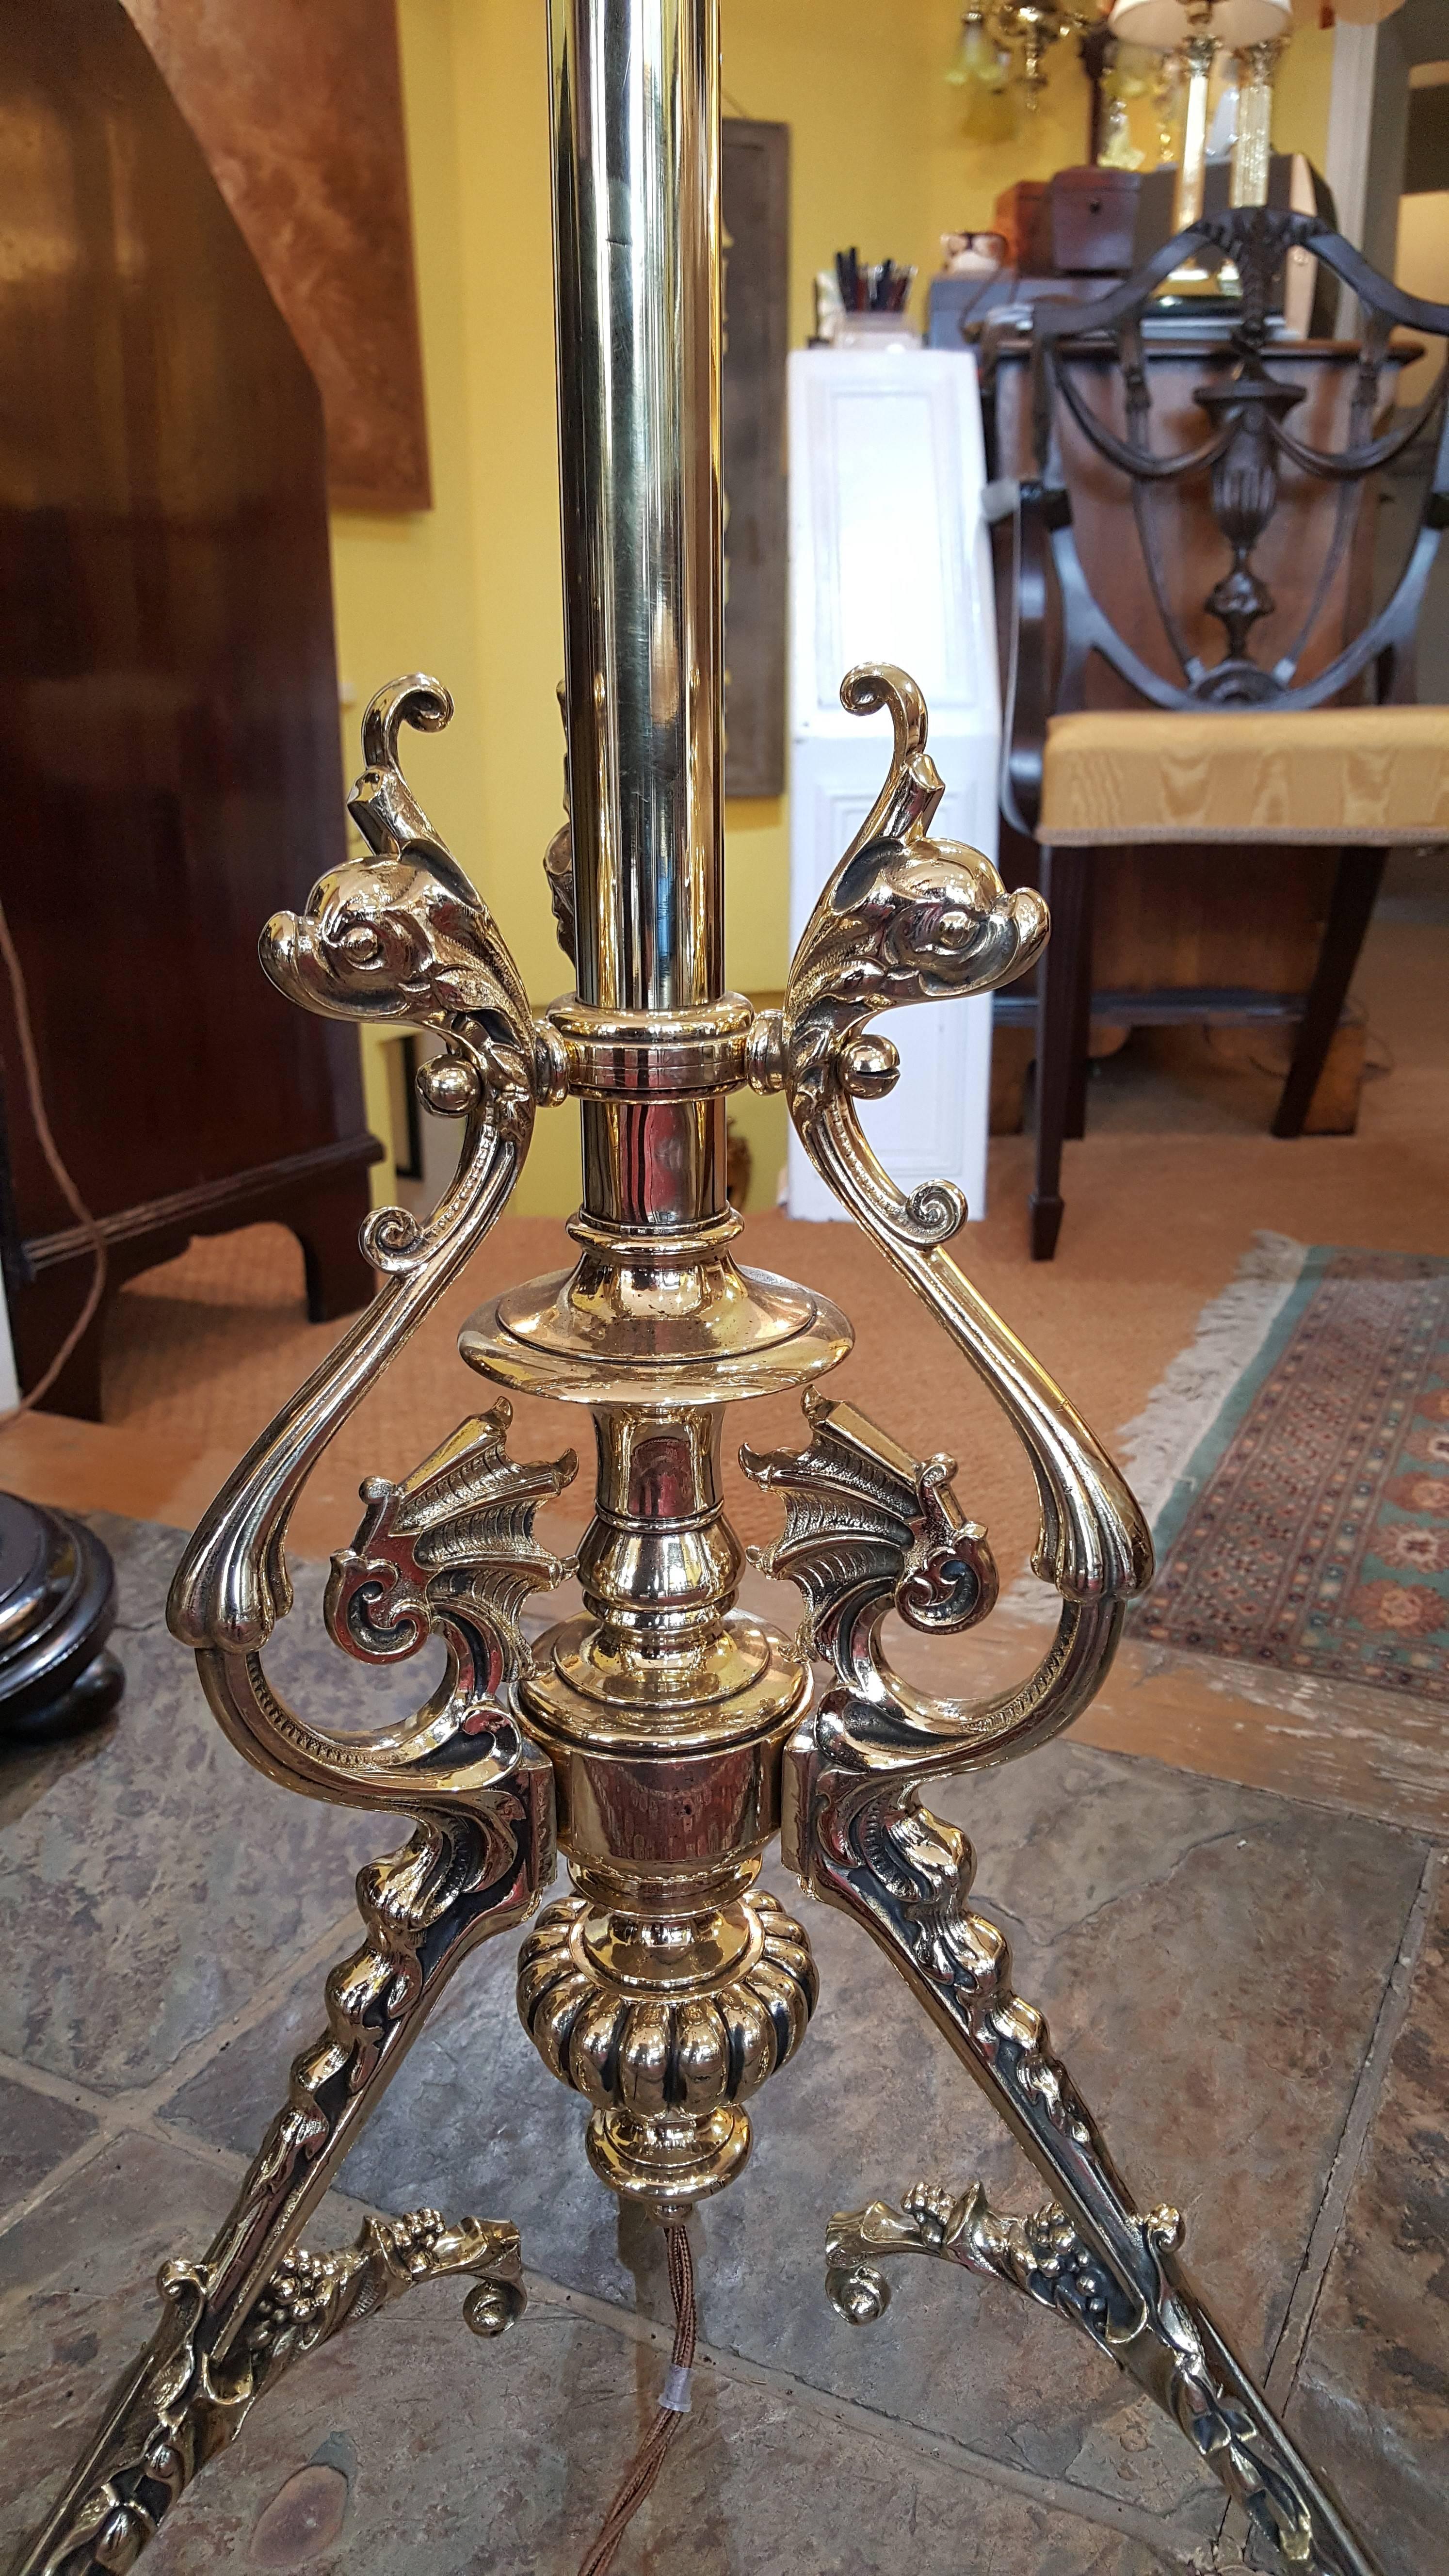 Mid-19th Century Victorian Oil Standard Lamp, Converted to Electric